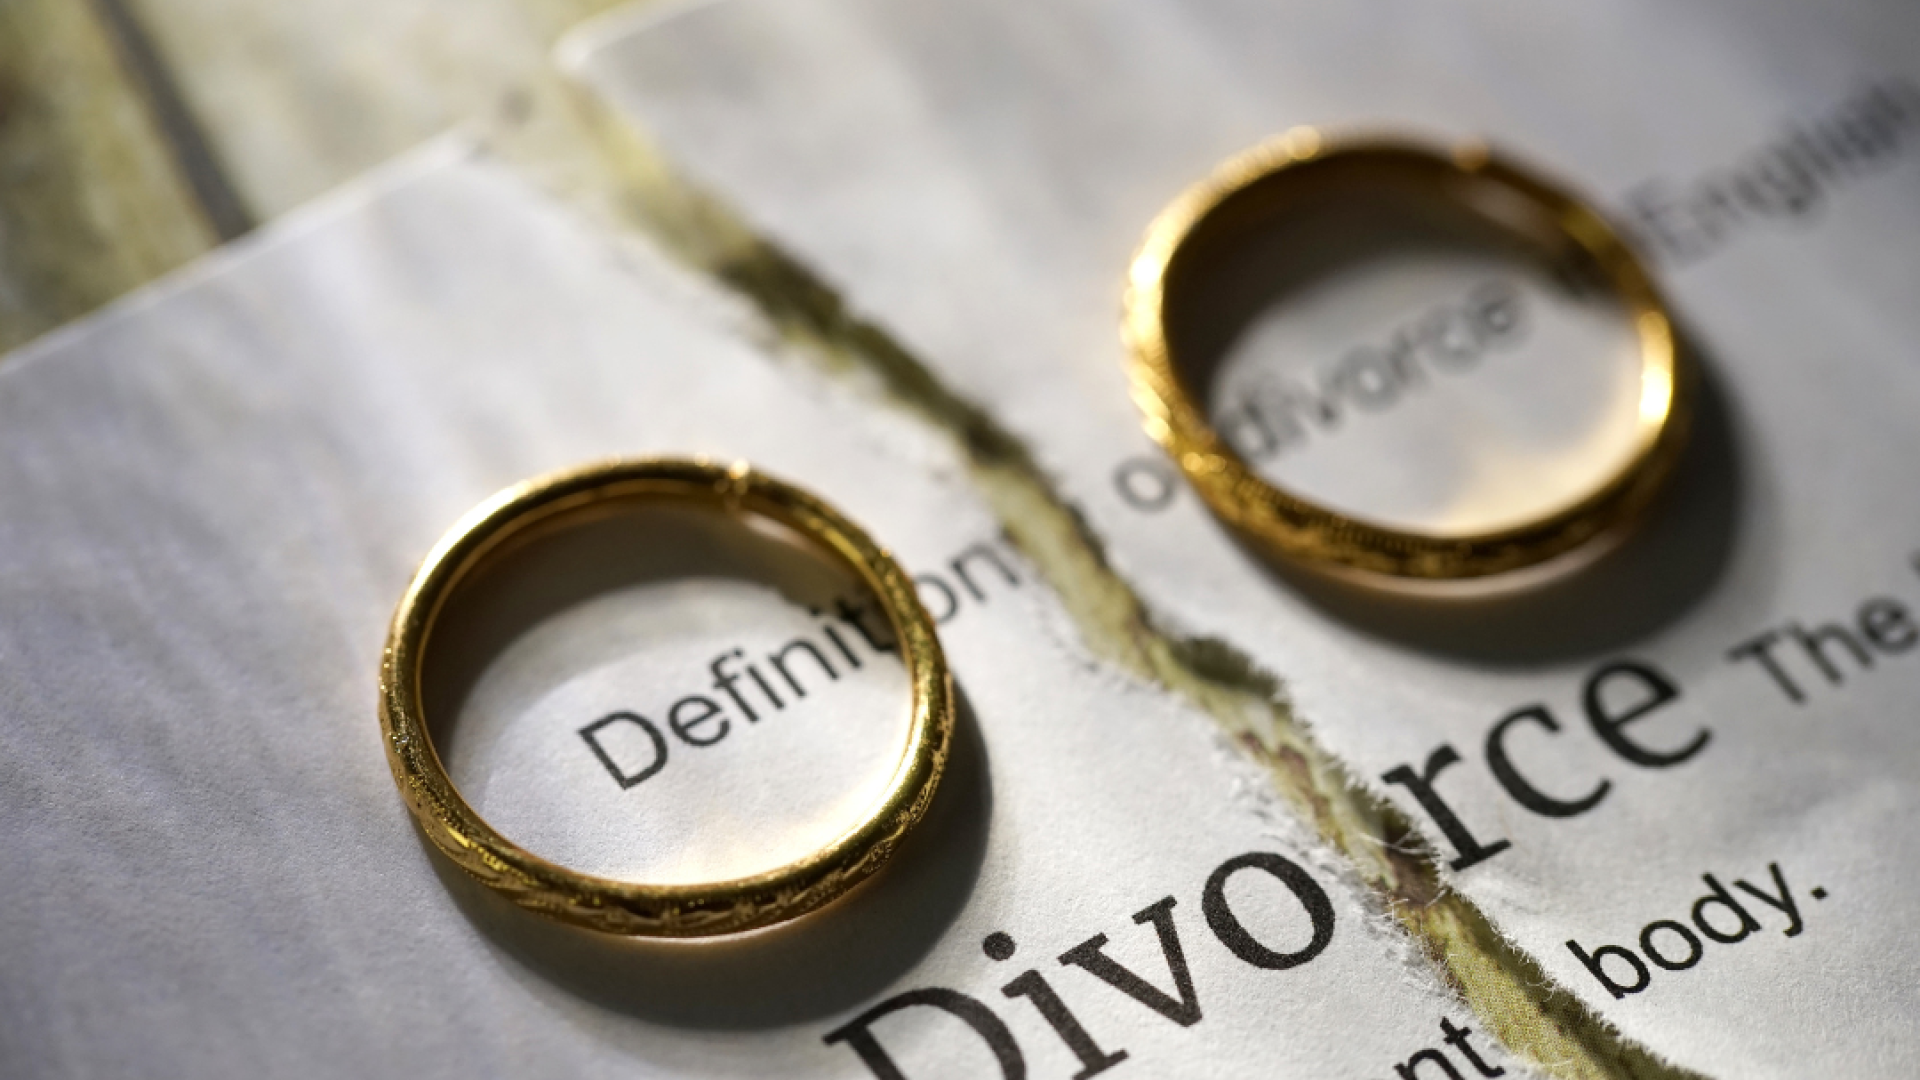 Two wedding rings sit atop a piece of paper that reads "Divorce"